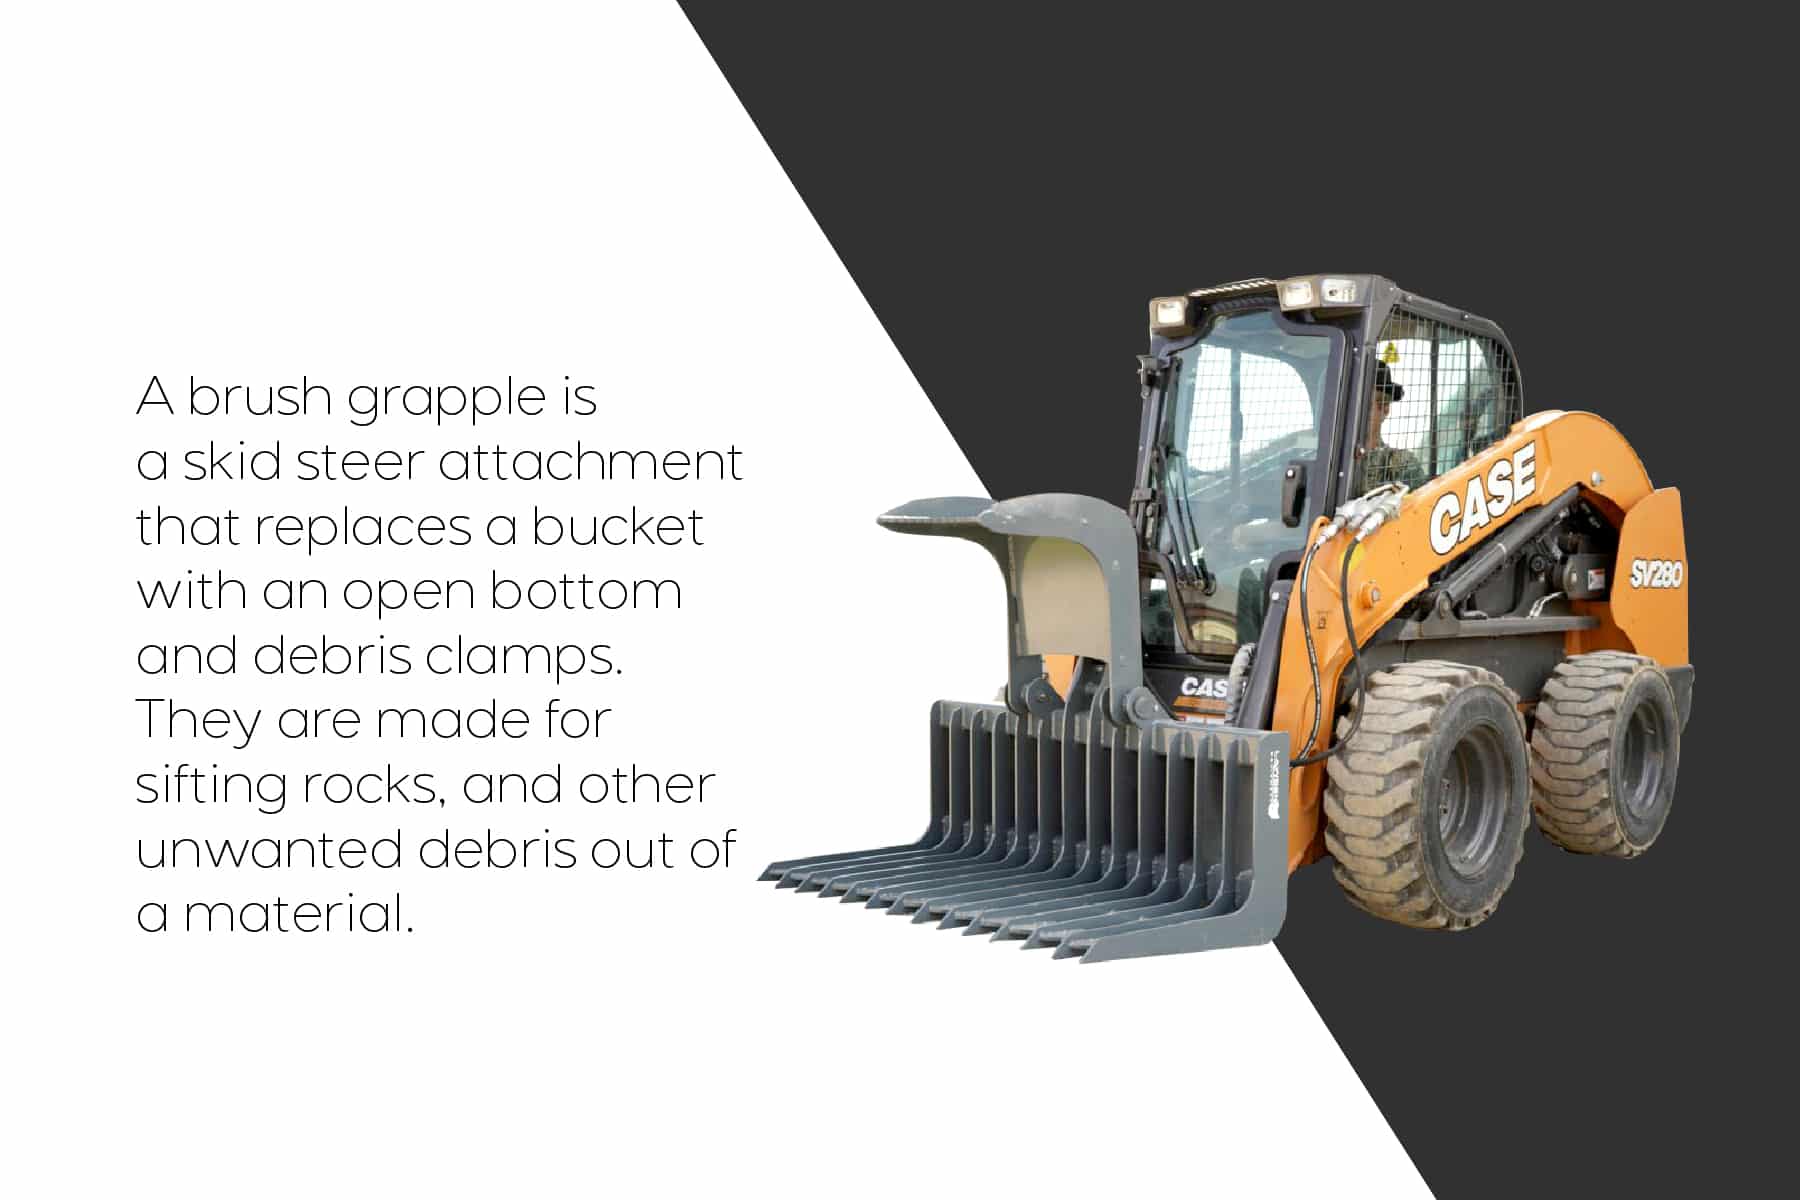 graphic about a brush grapple